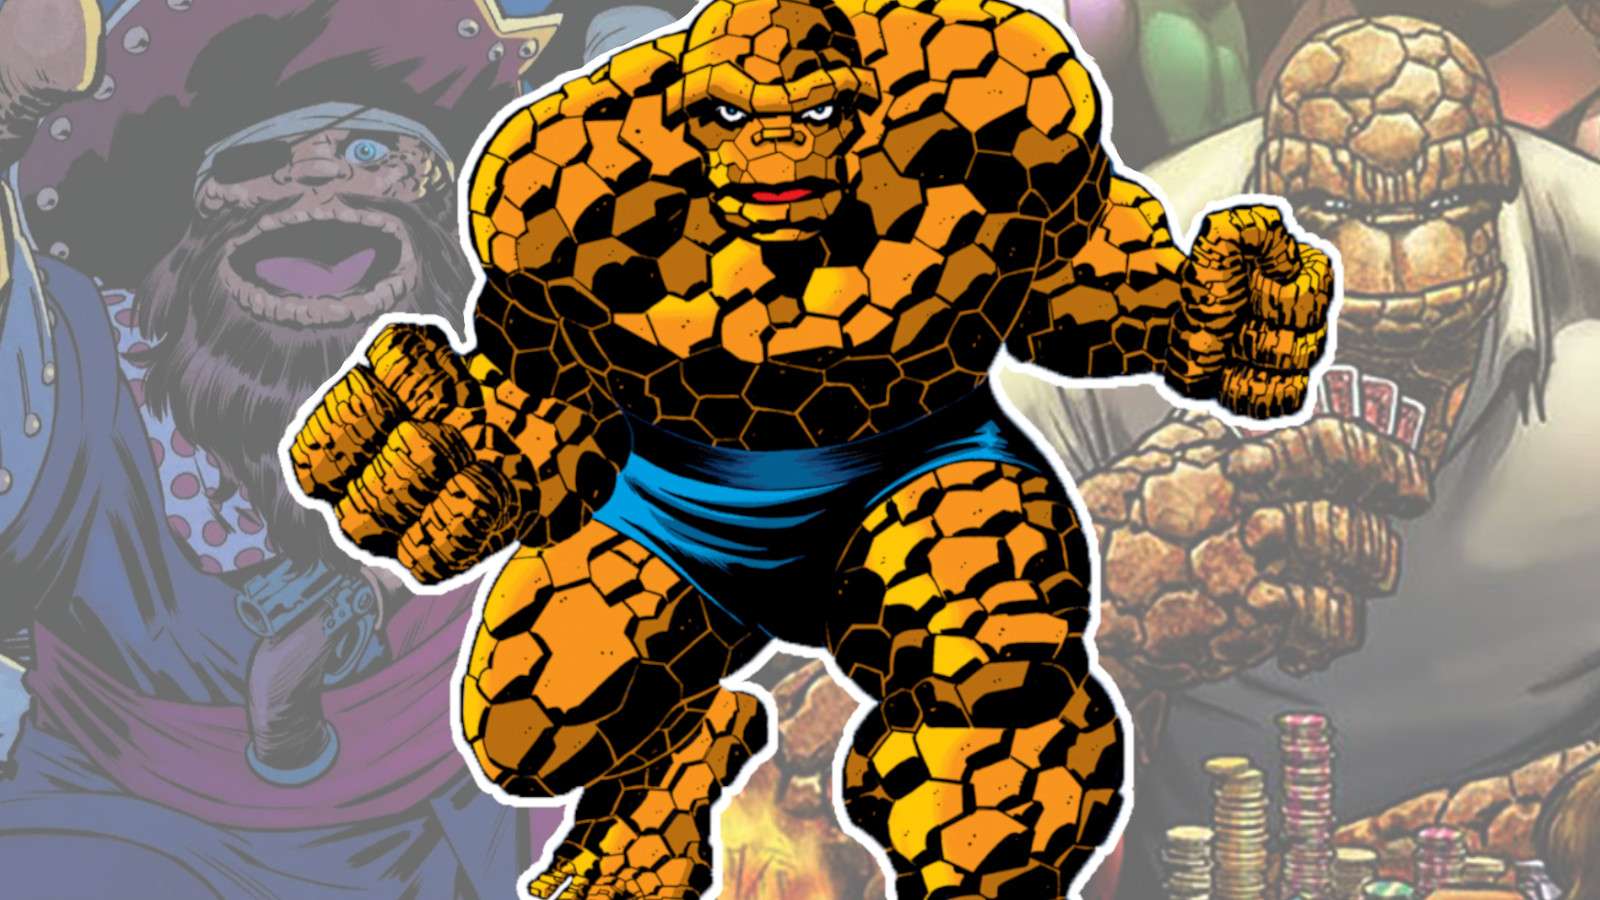 The thing throughout the years in Marvel Comics